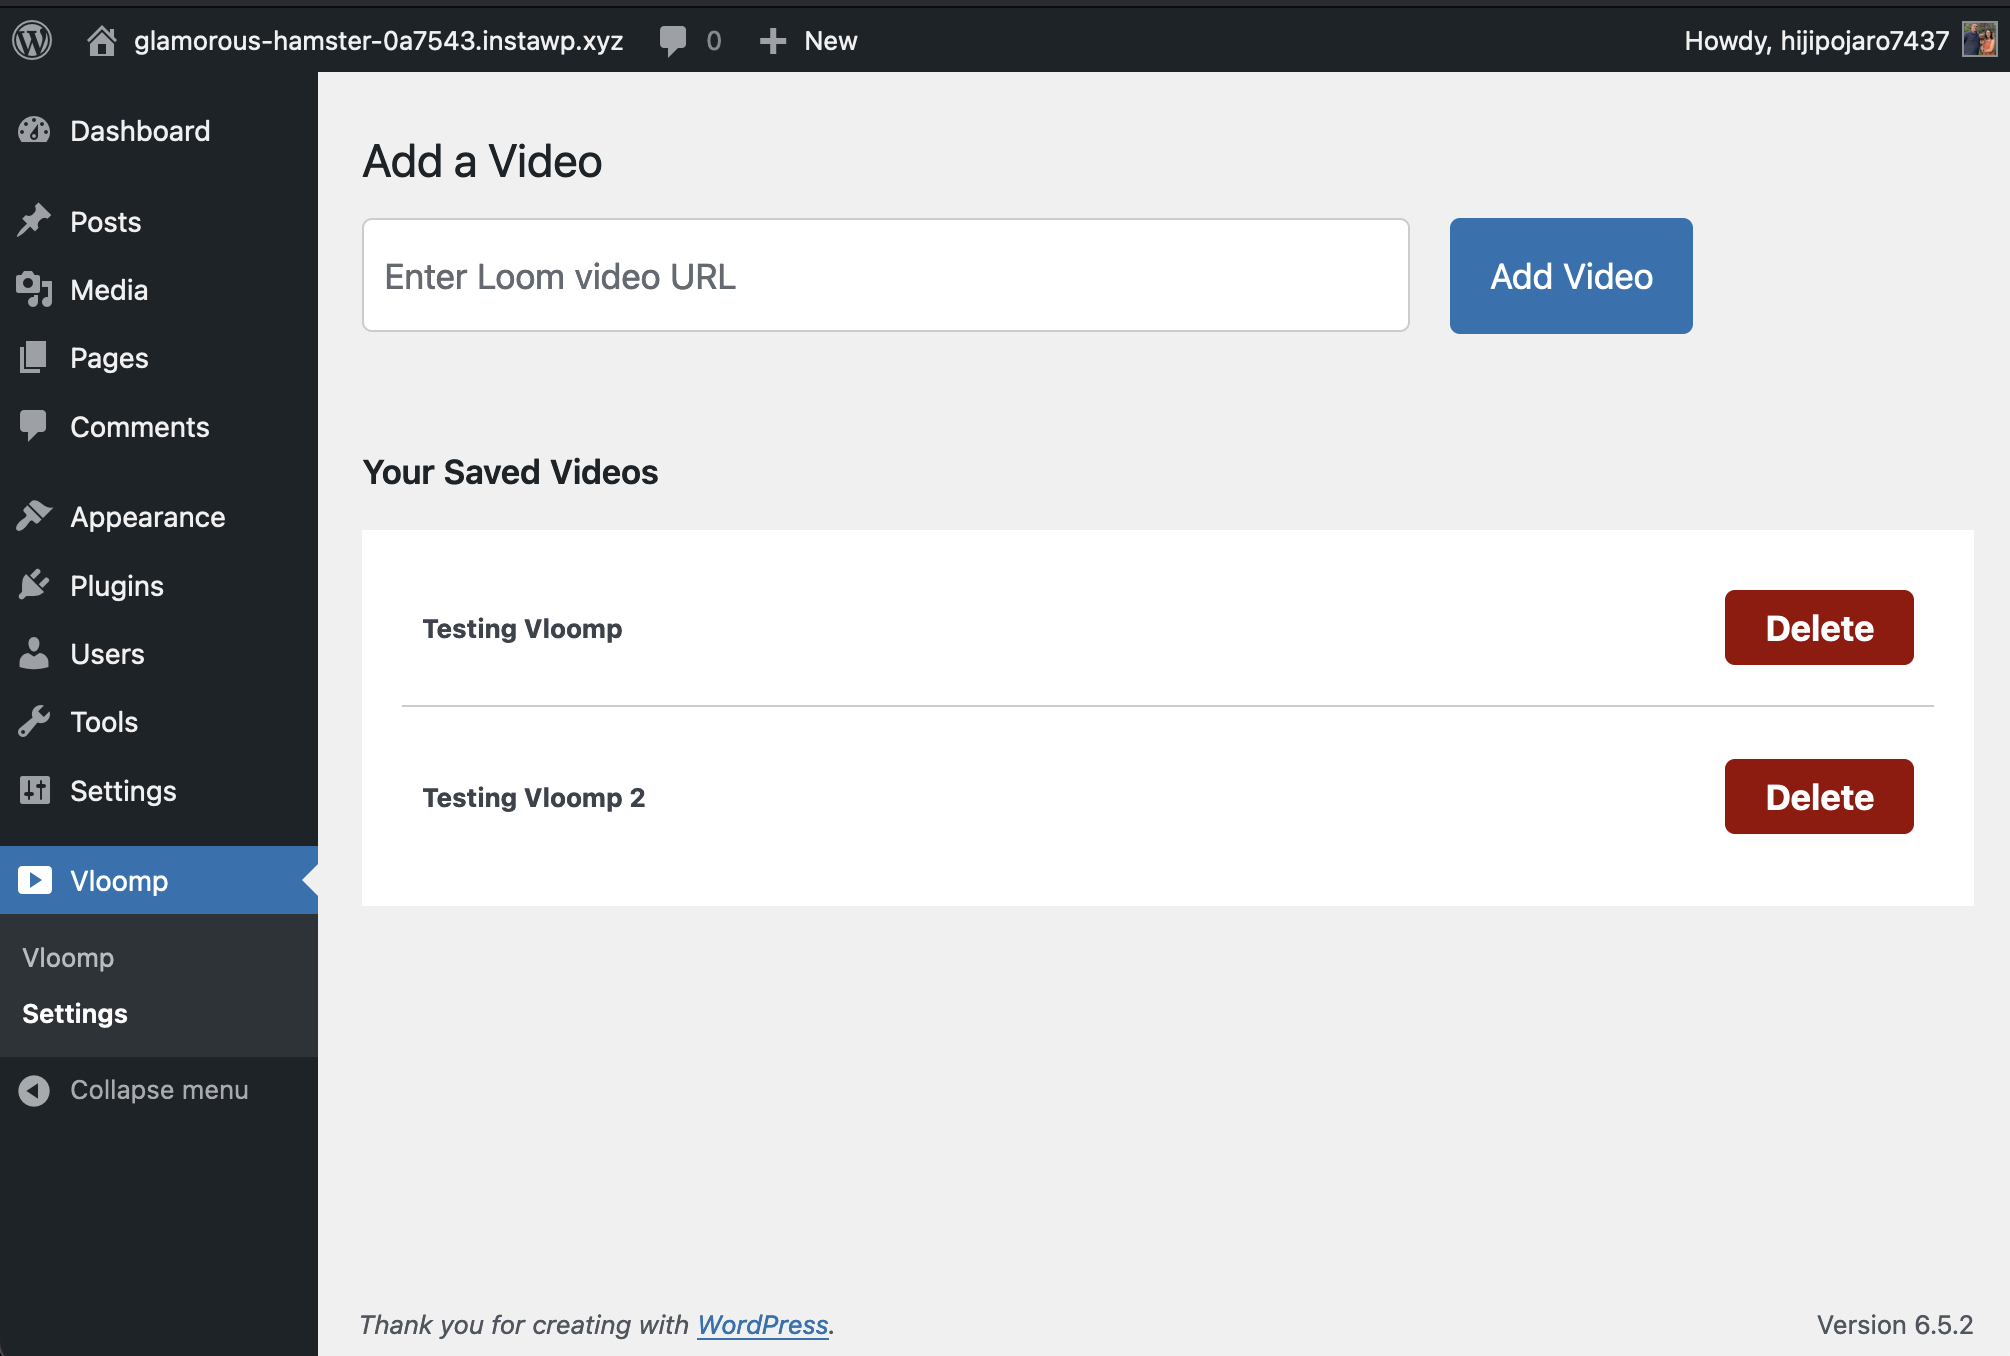 This area of the WordPress backend displays the settings for Vloomp for adding videos